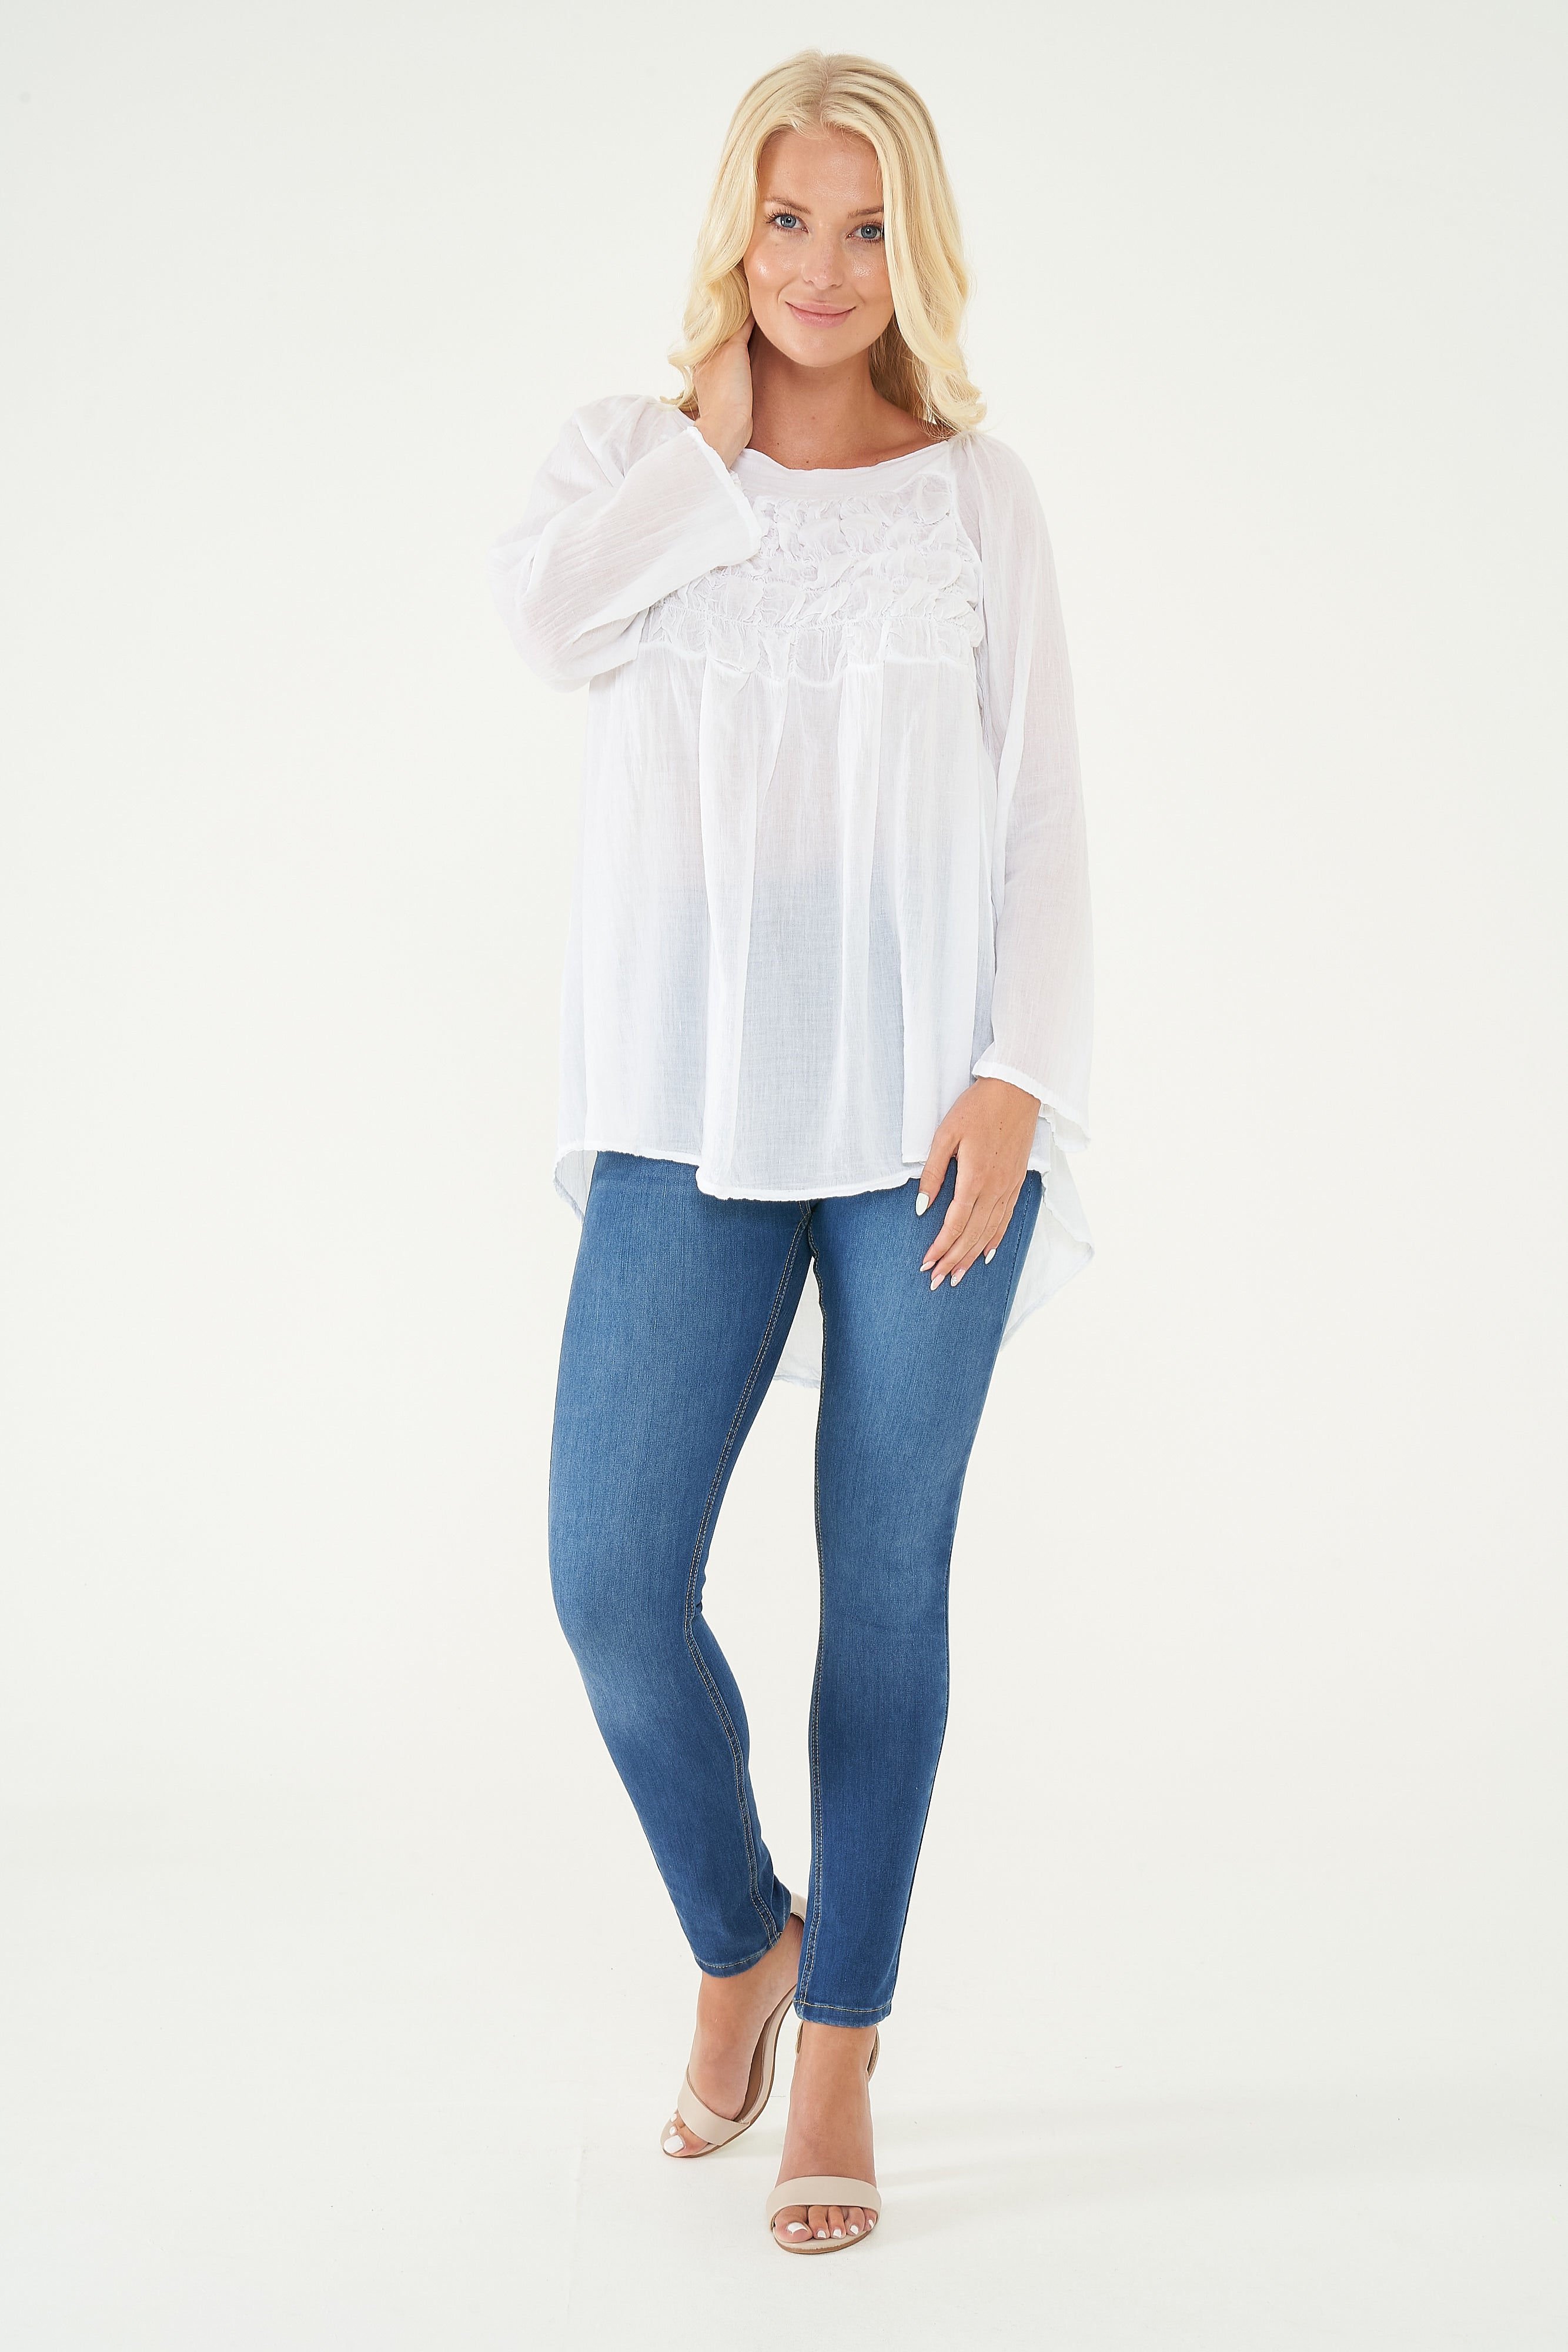 Bubble Long Sleeve Cotton Top - back in stock